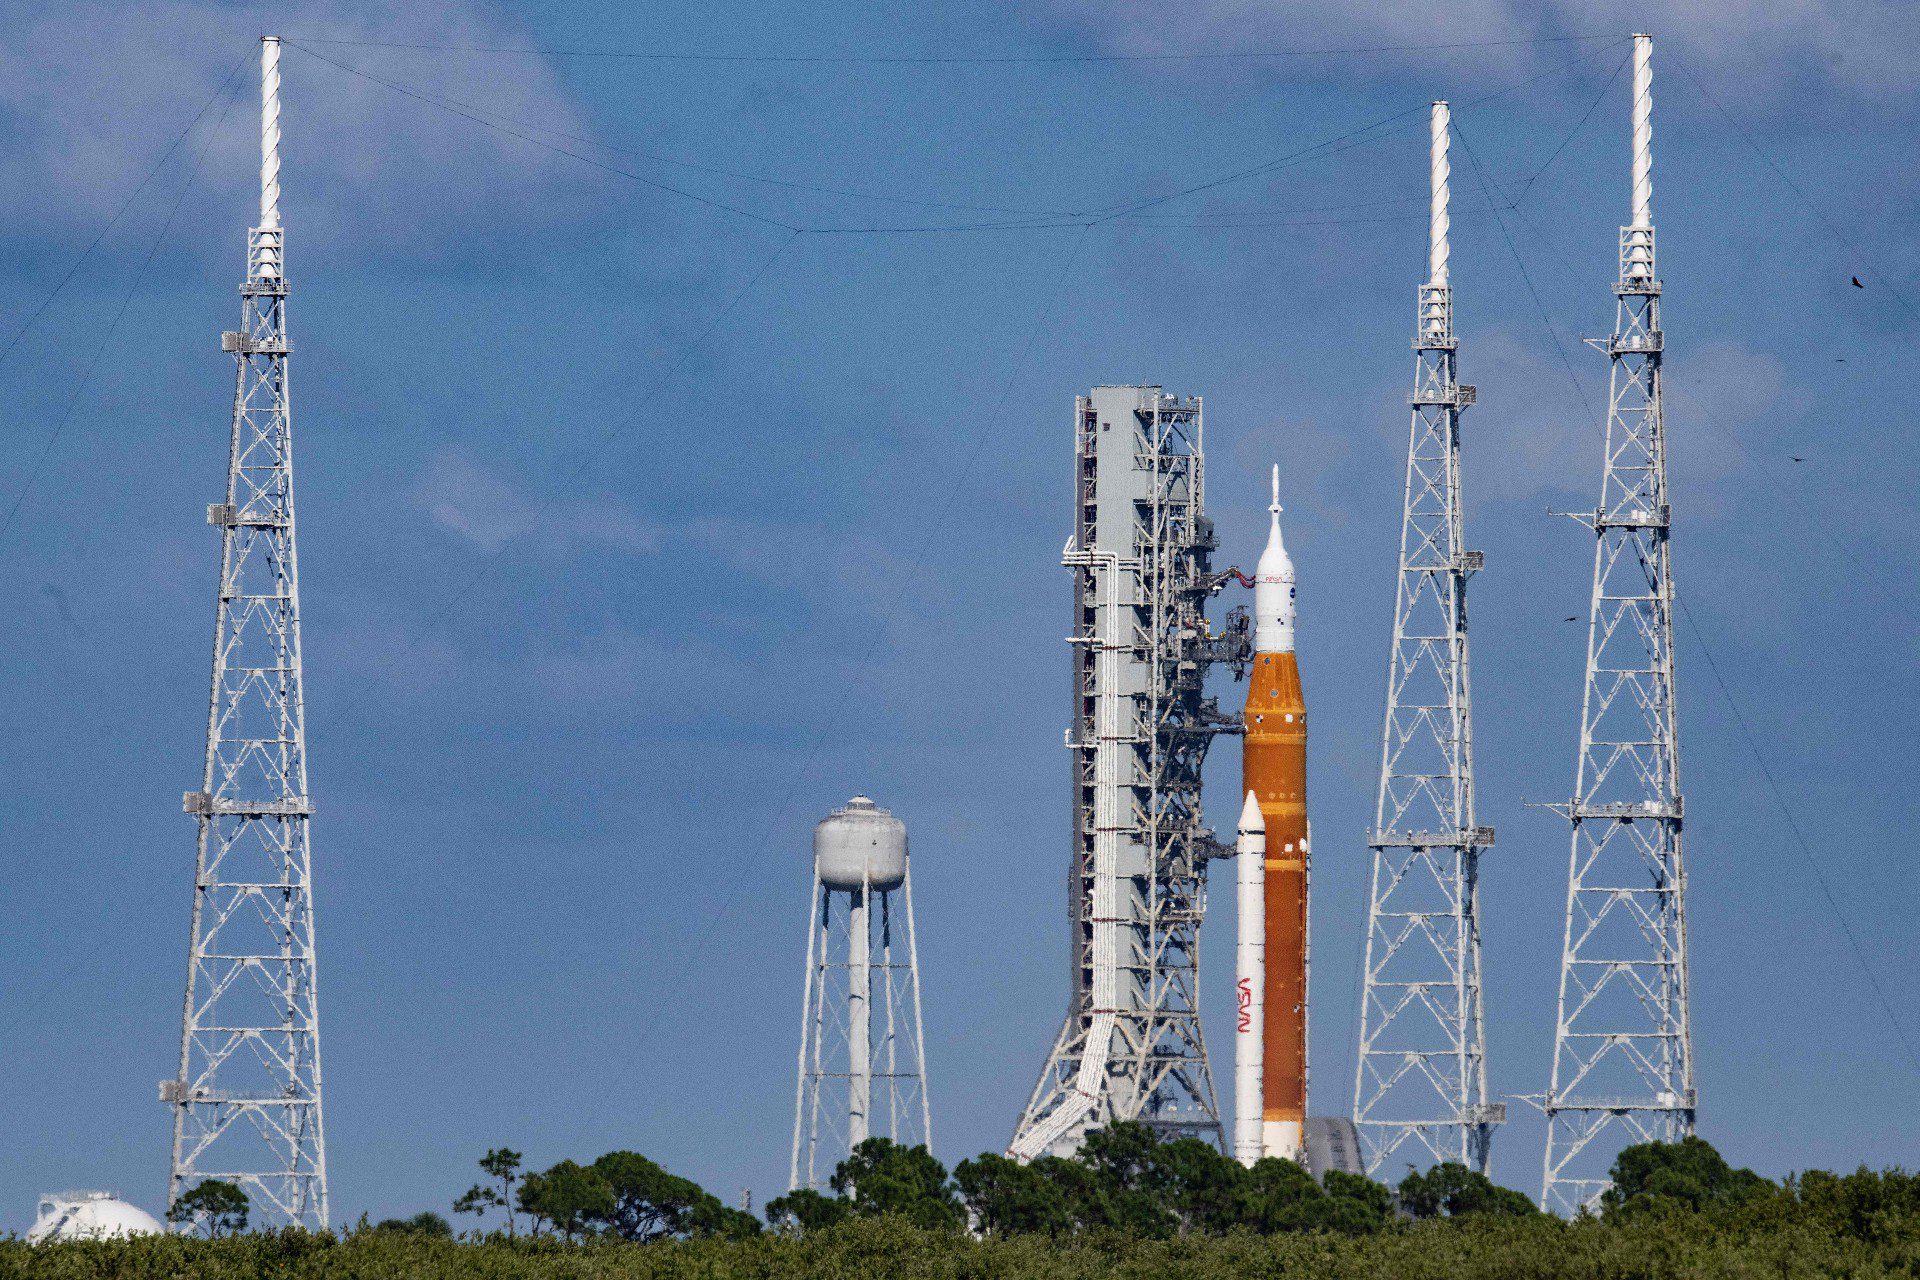 NASA has canceled the scheduled September 27 launch of the Artemis 1 rocket due to Hurricane Ian, which is expected to gain strength as it approaches Florida.